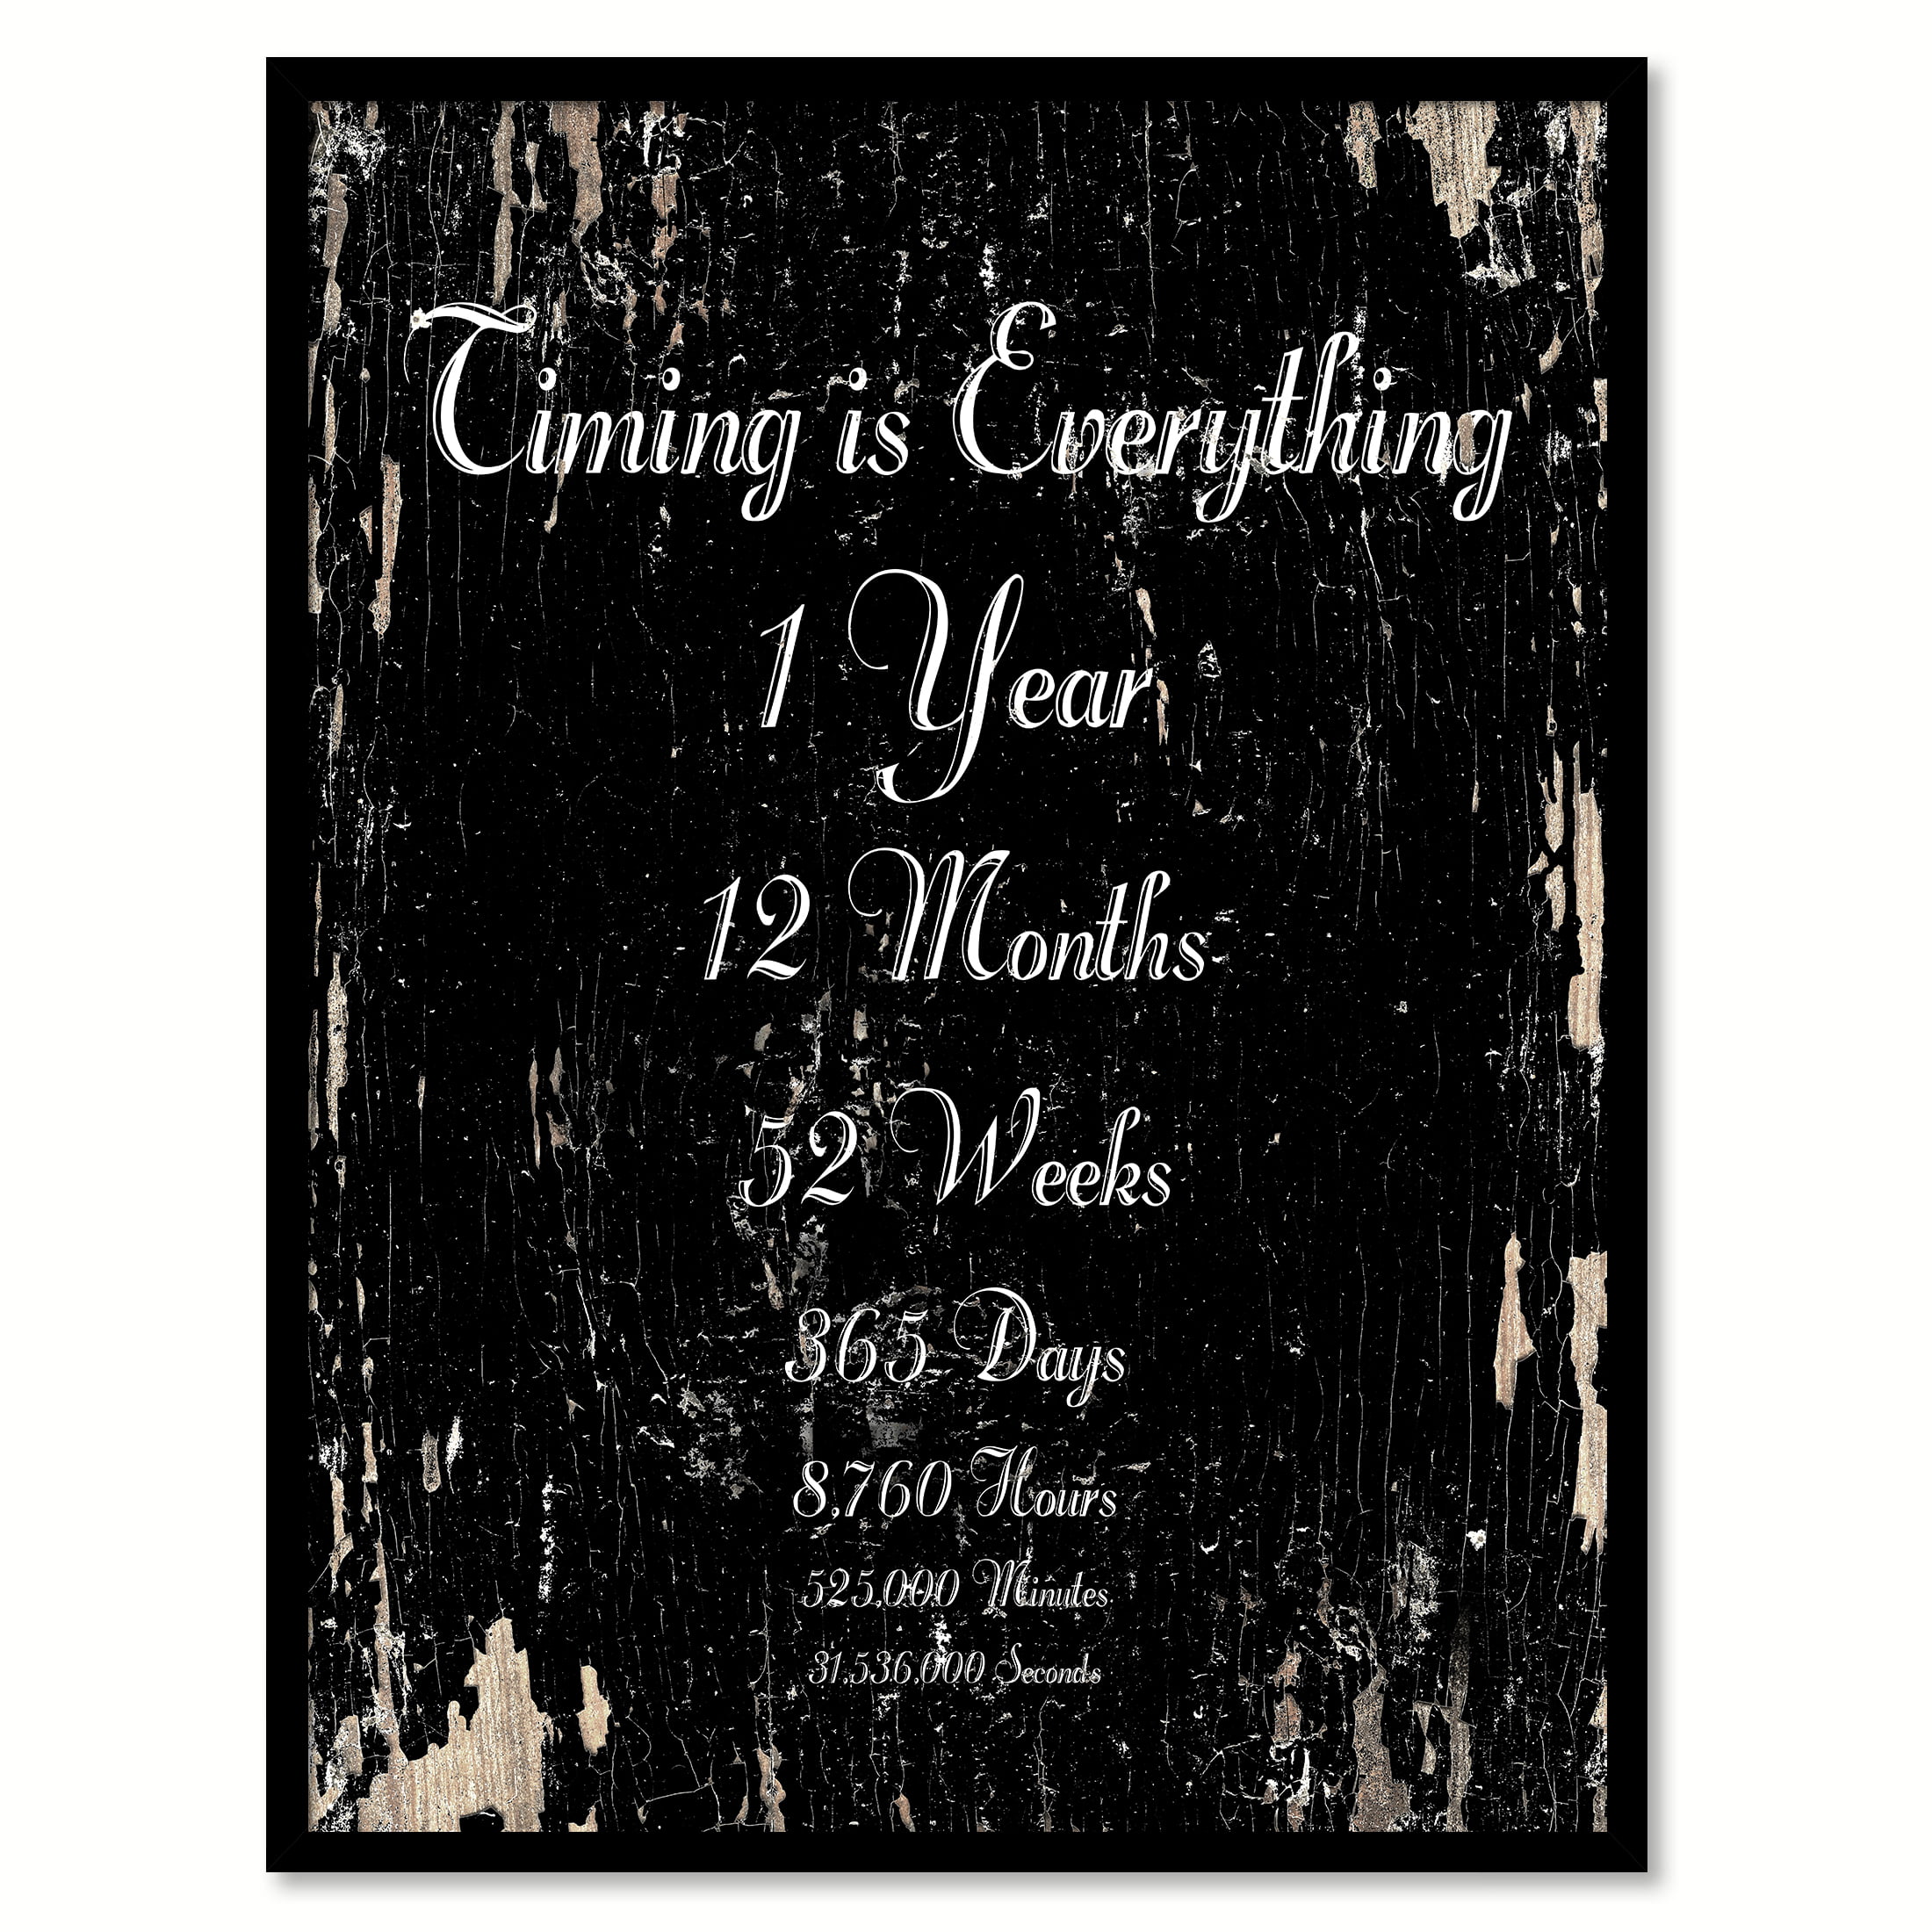 Timing Is Everything 1 Year 12 Months 52 Weeks 365 Days 8 760 Hours 525 000 Minutes 31 536 000 Seconds Quote Saying Black Canvas Print With Picture Frame 7 X 9 Walmart Com Walmart Com